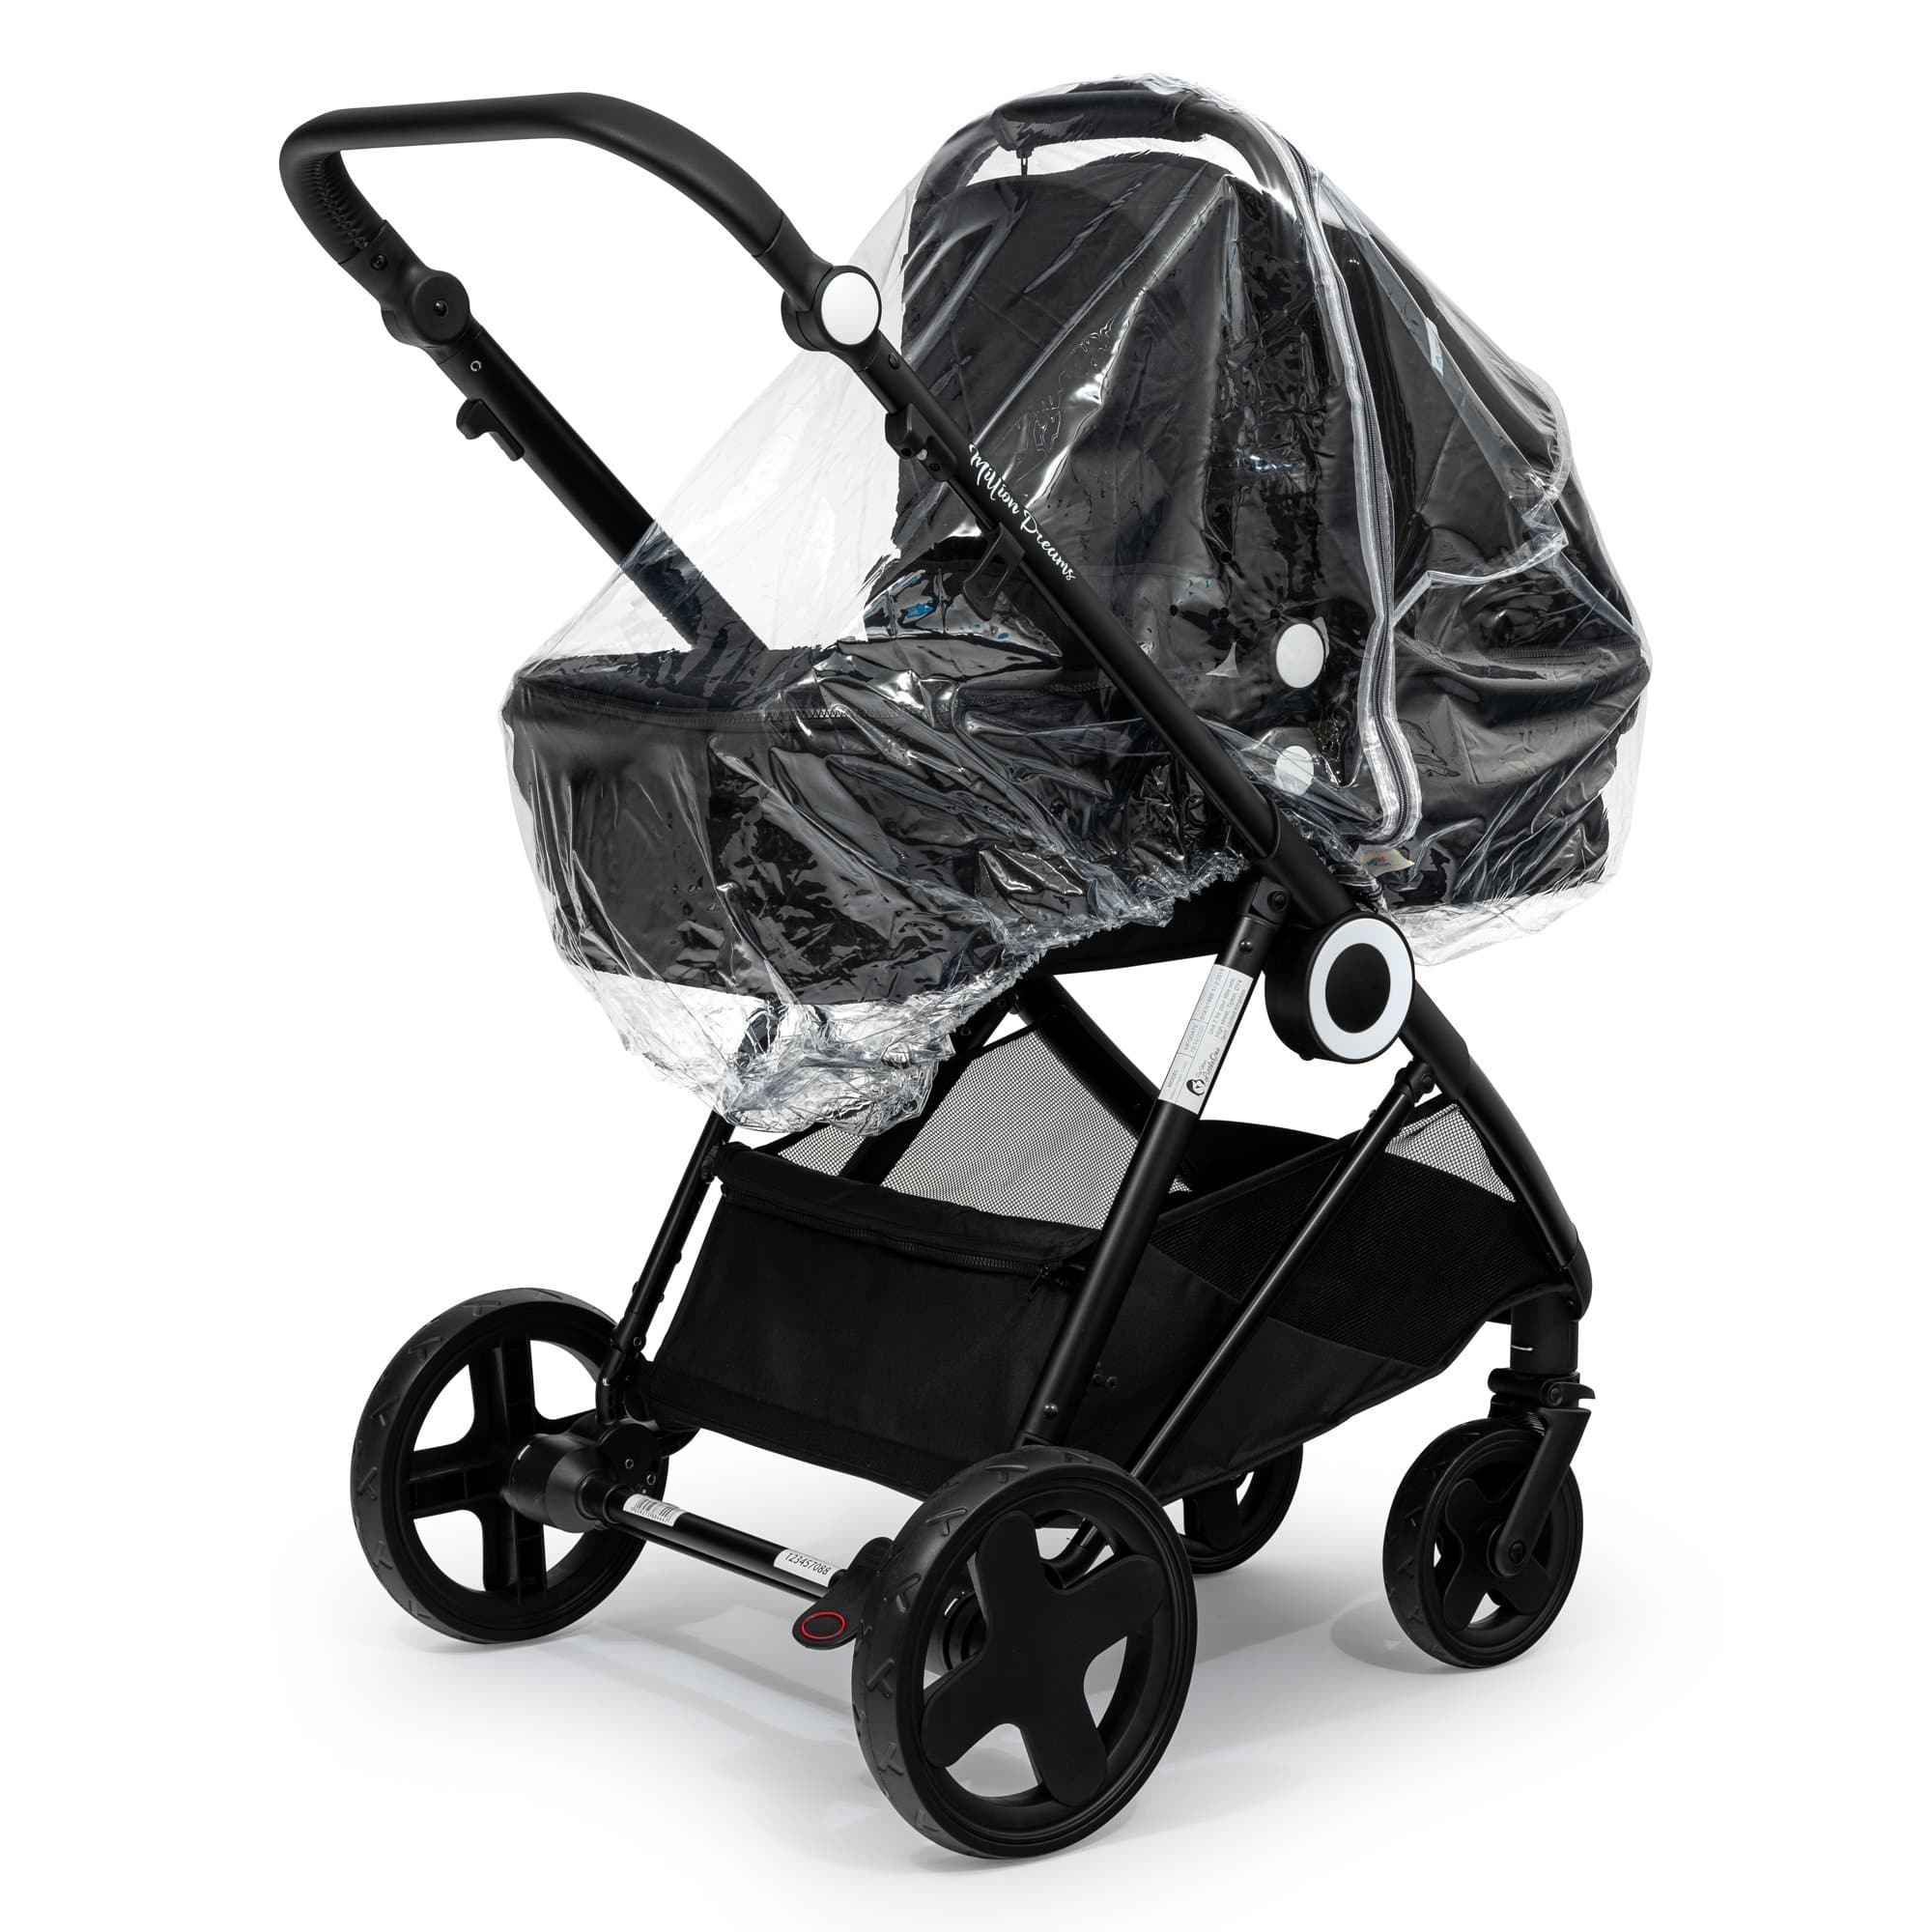 2 in 1 Rain Cover Compatible with Koochi - Fits All Models - For Your Little One